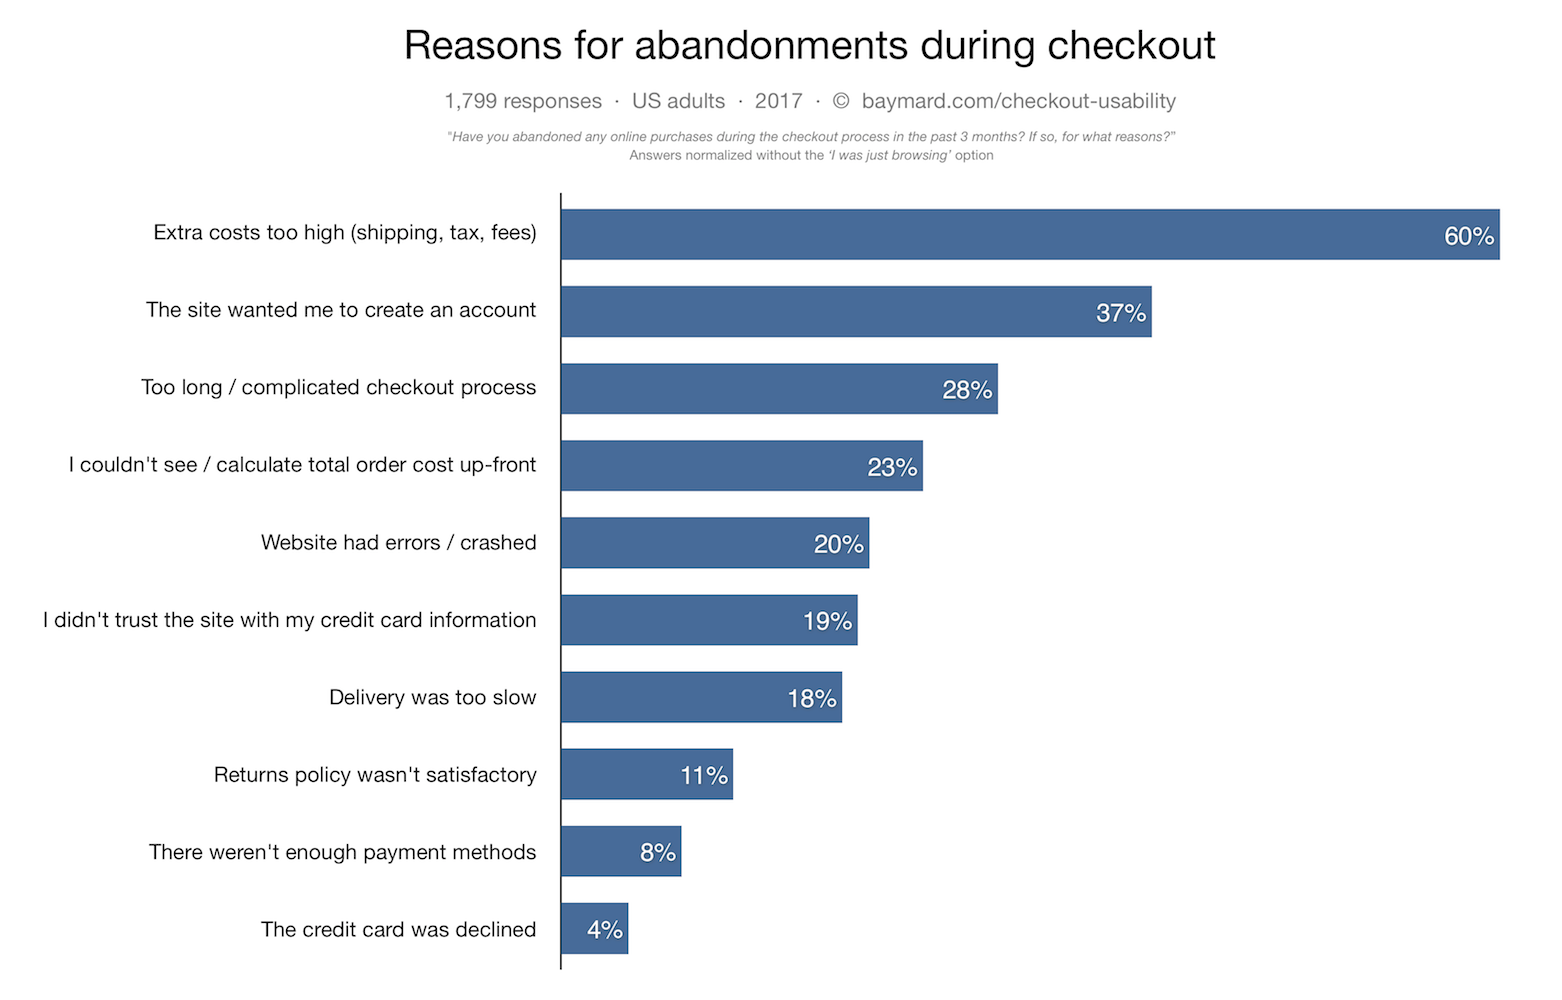 Reasons for Cart Abandonment